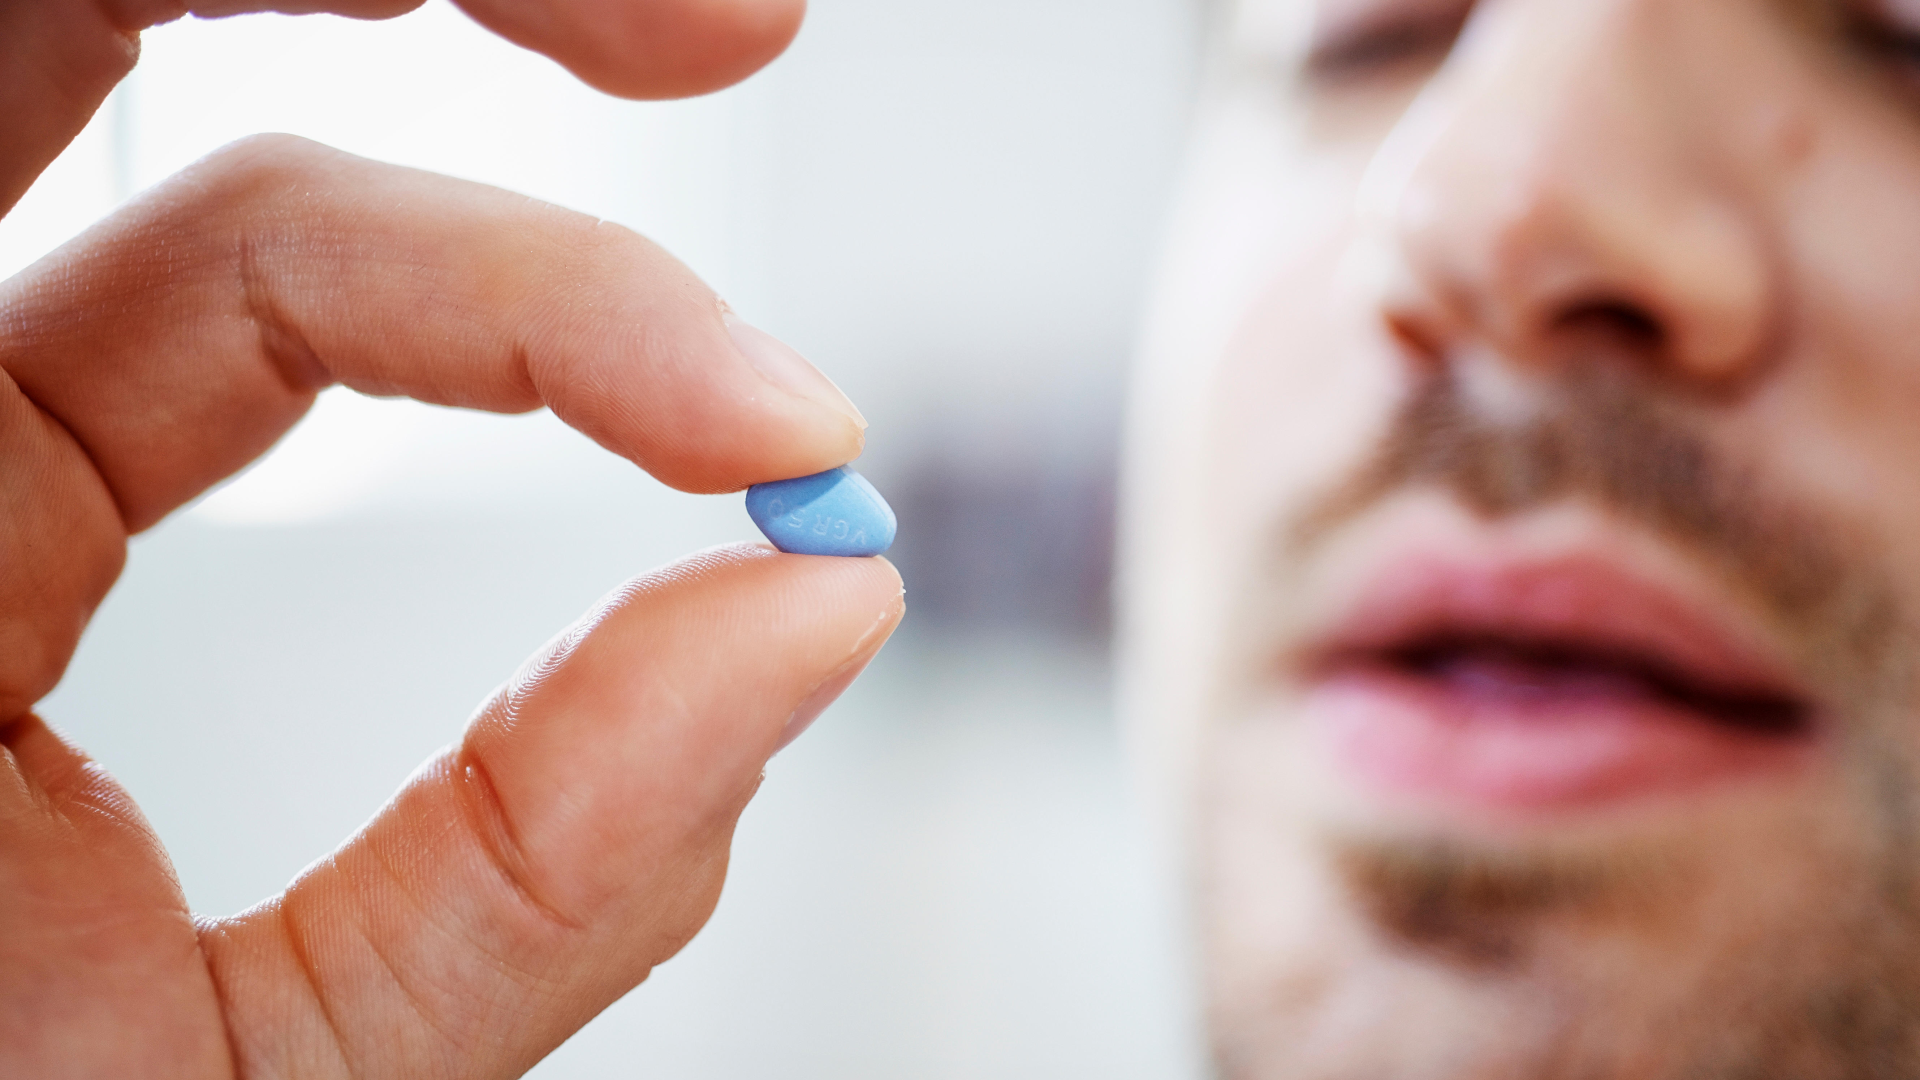 Can You Take a Daily Erectile Dysfunction Pill?